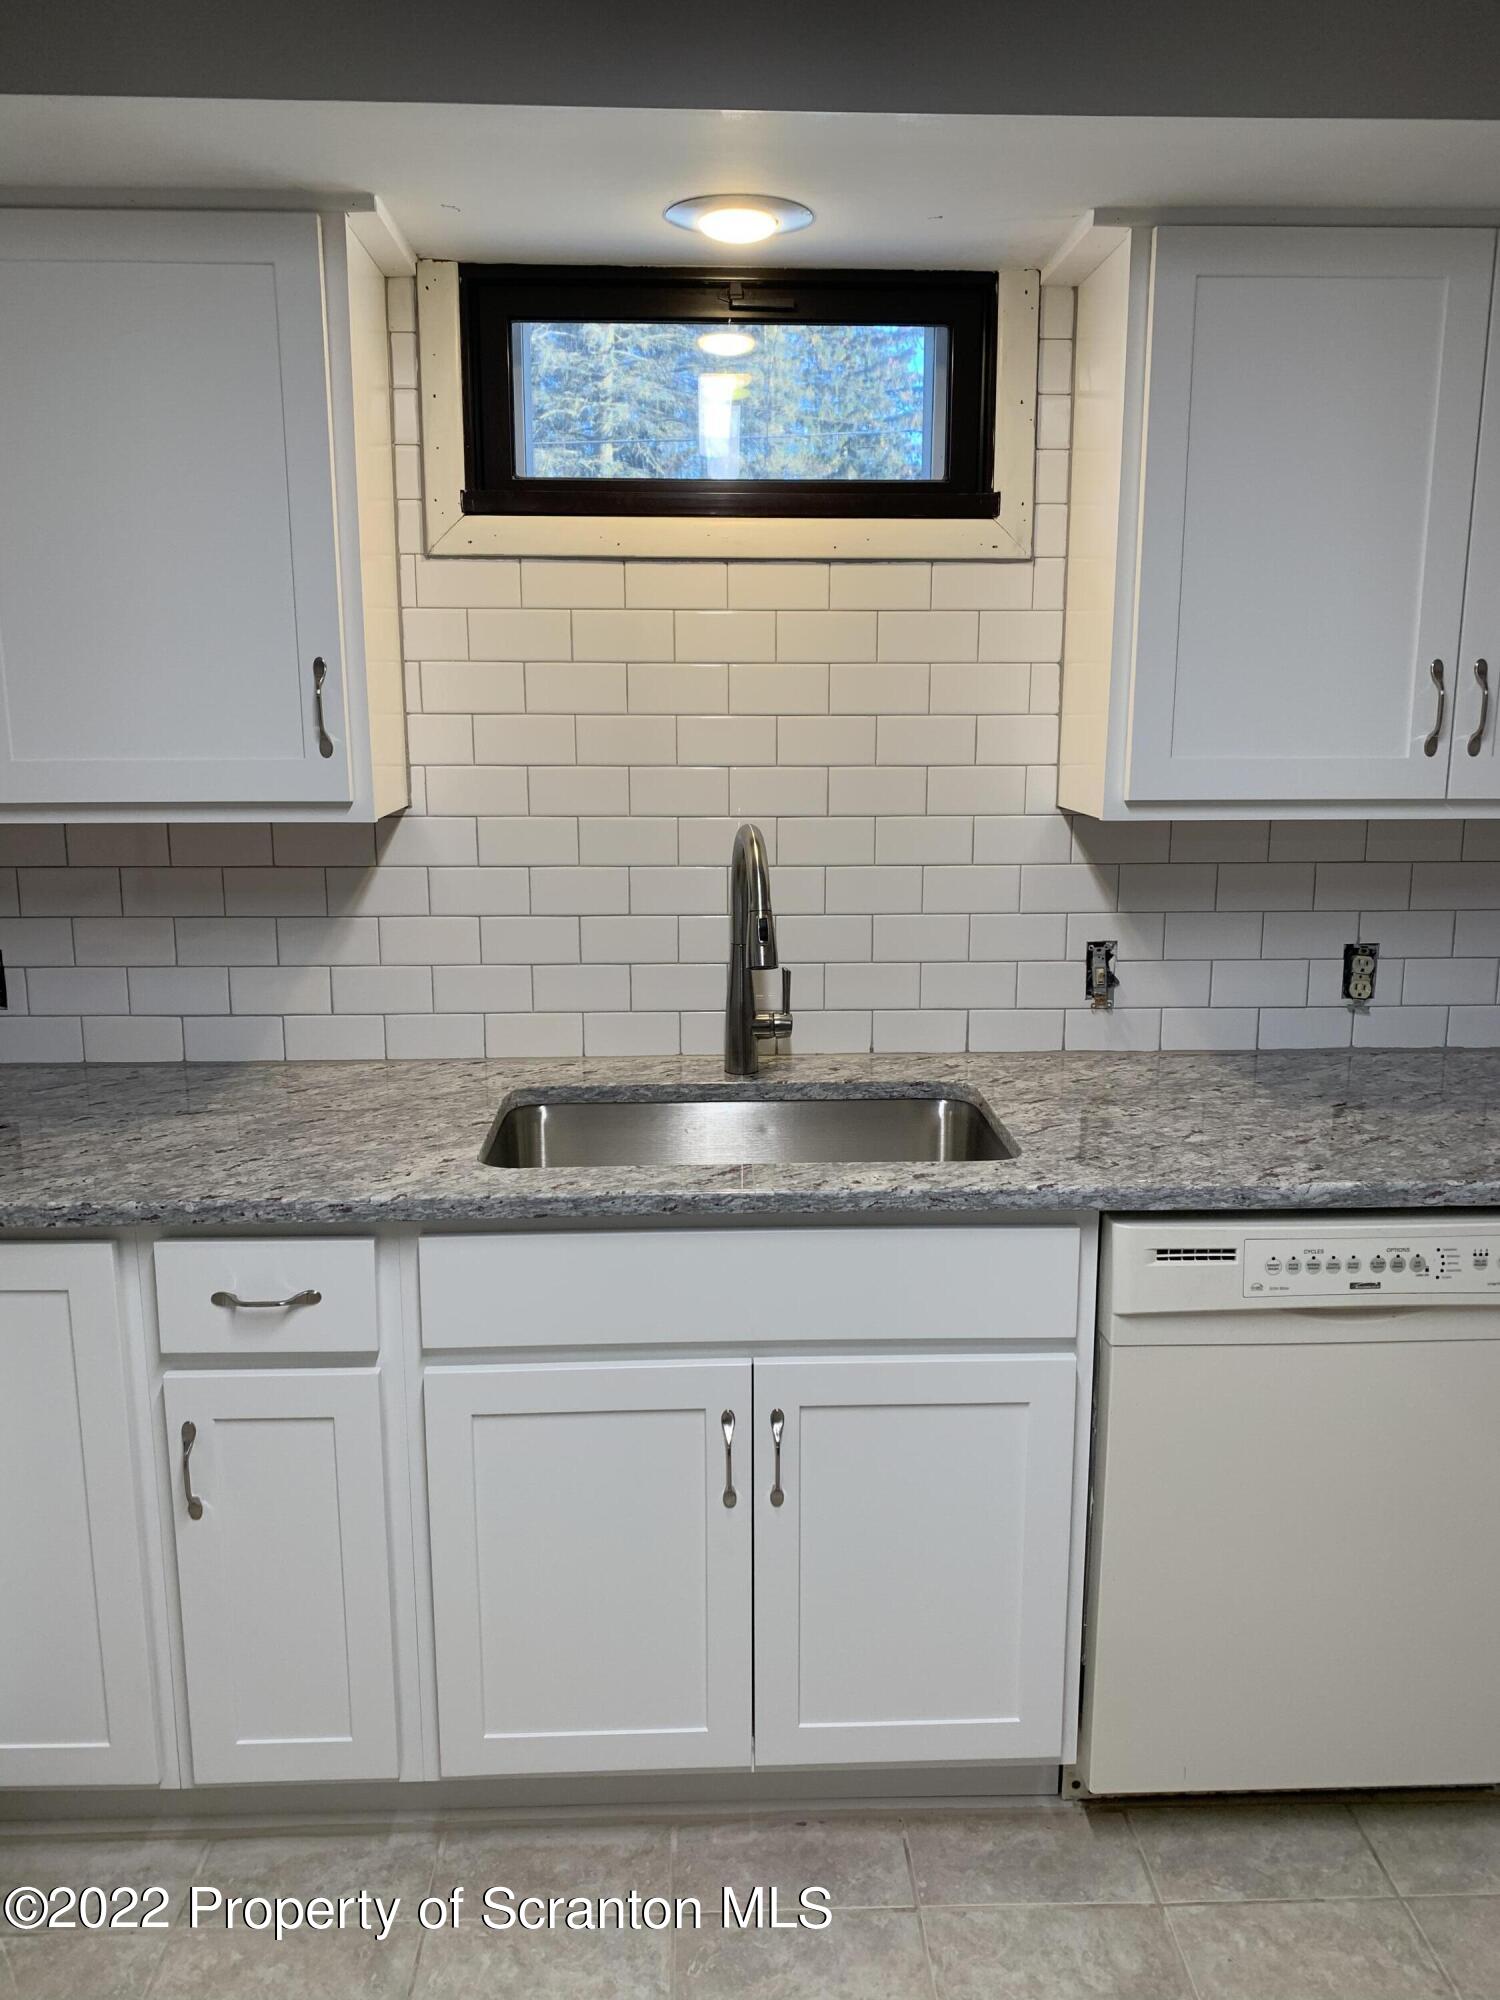 a kitchen with white cabinets a sink and dishwasher